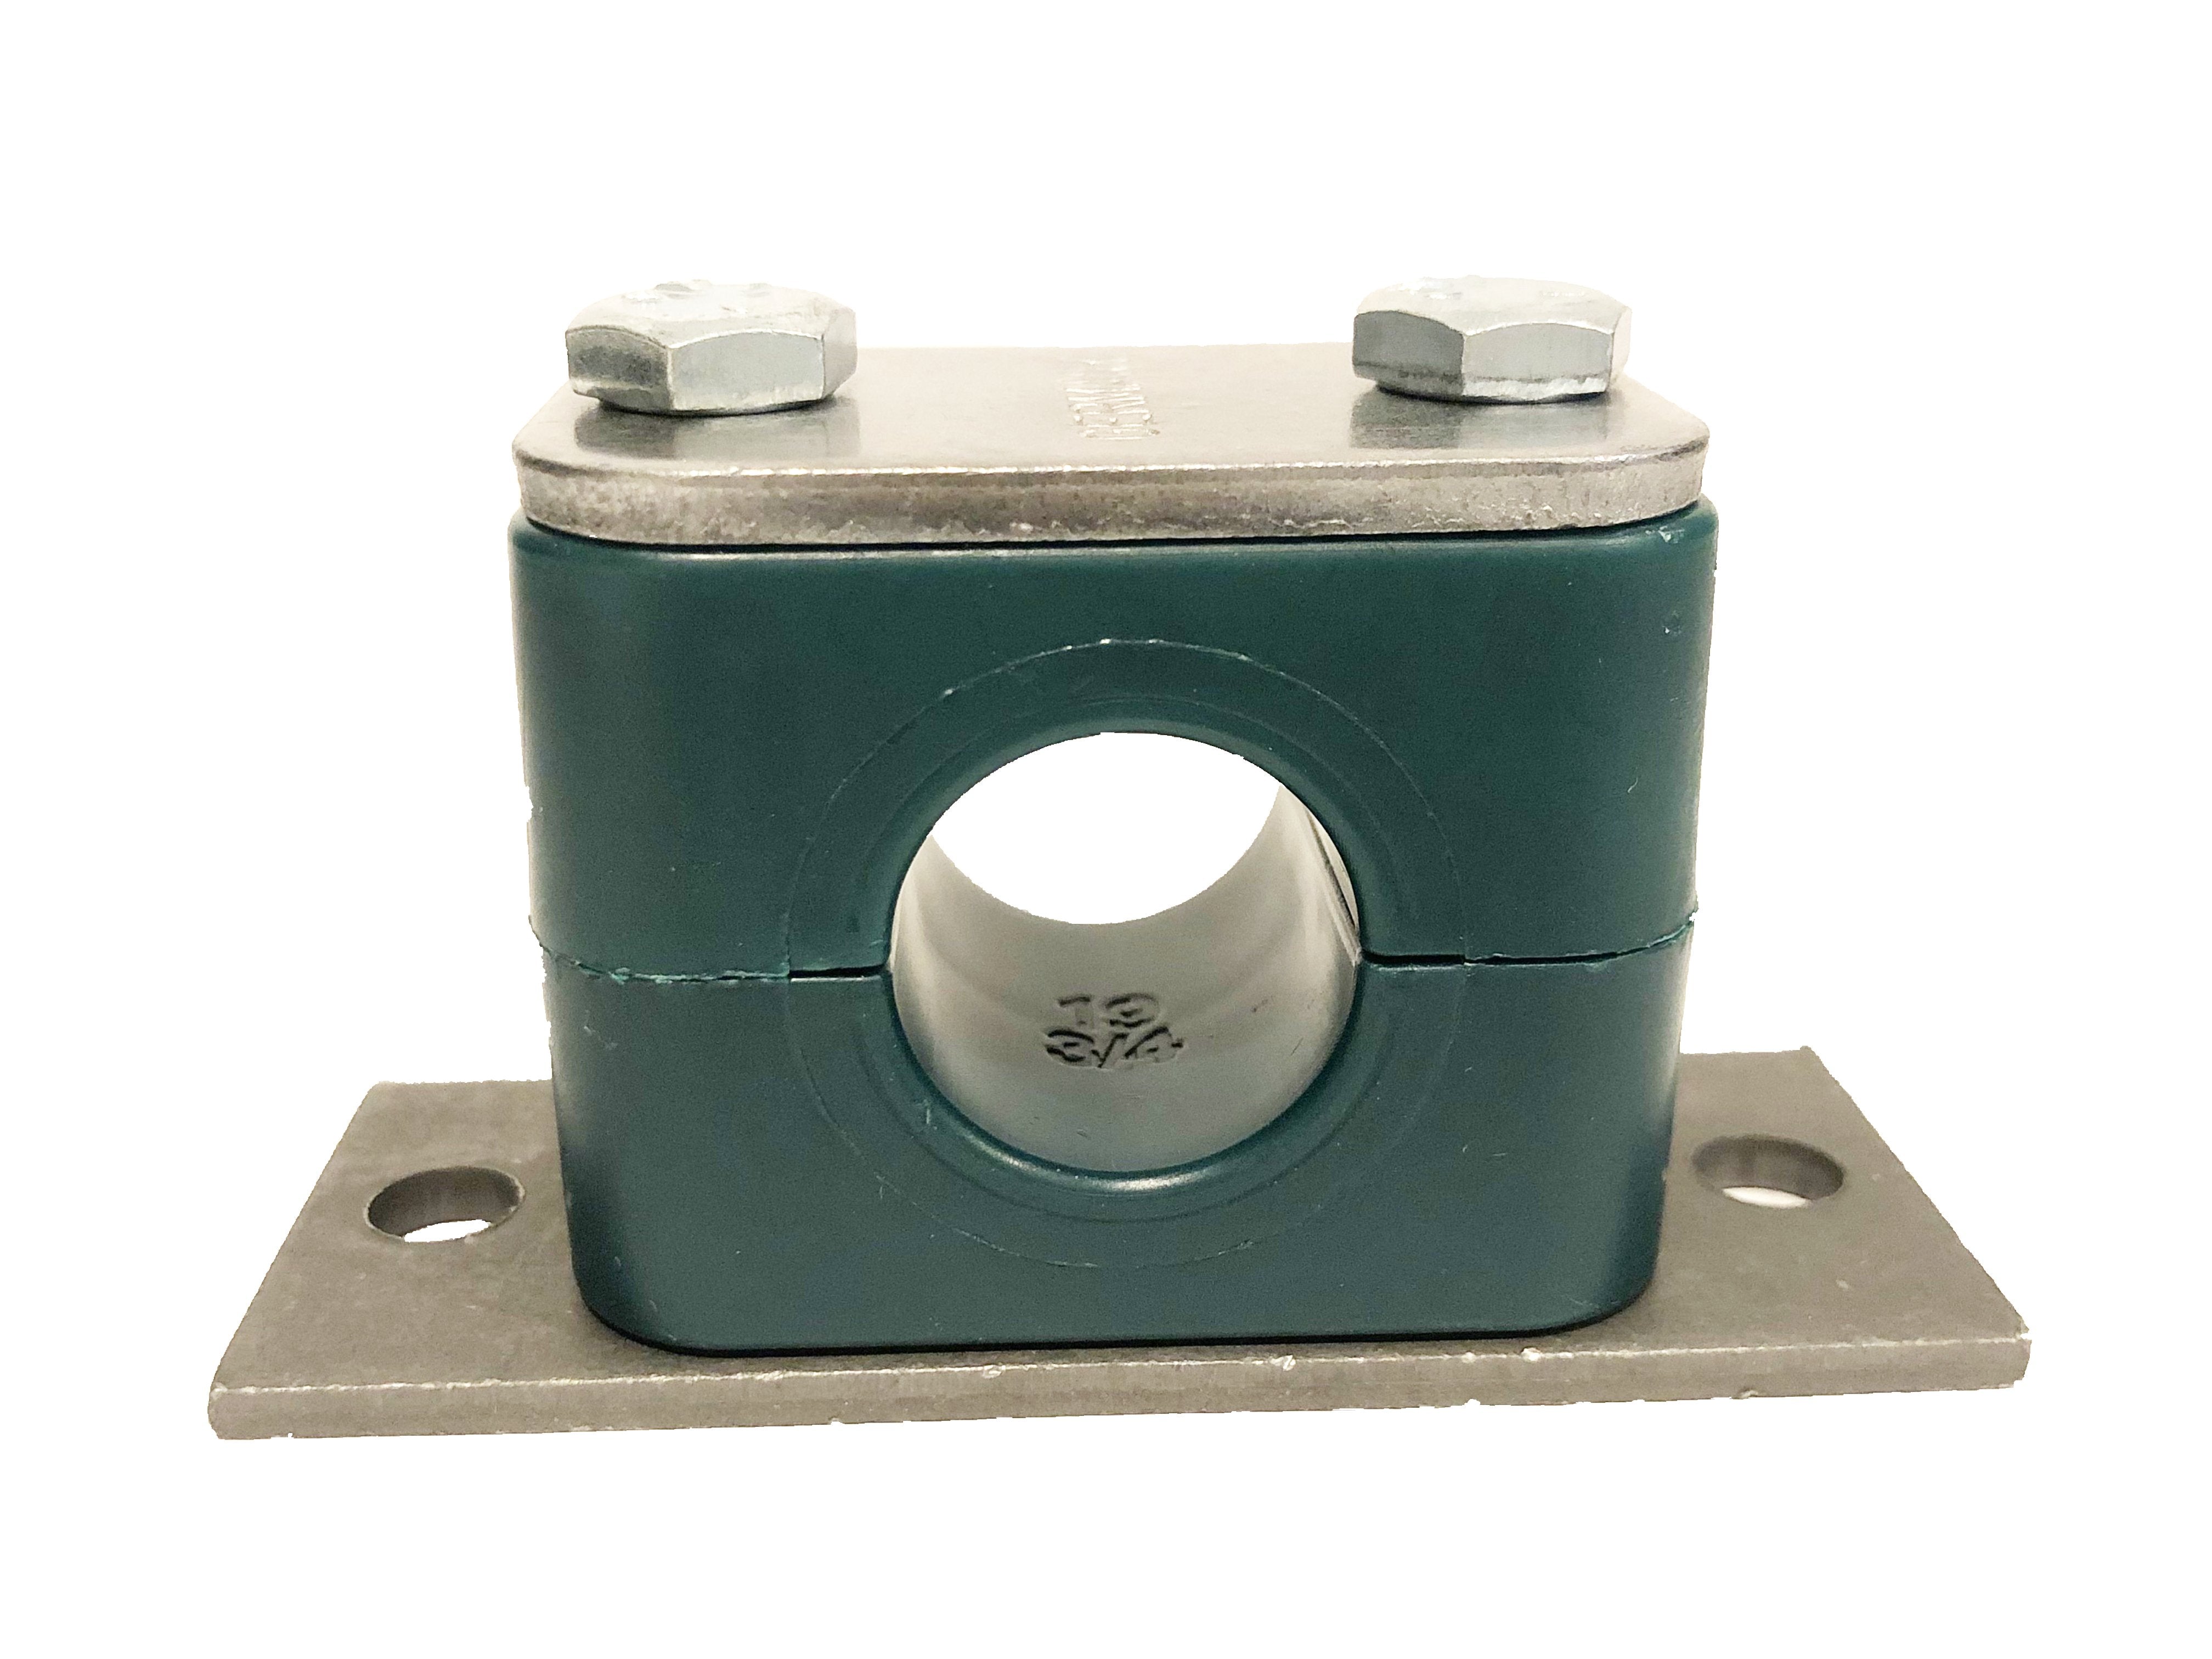 SPV-213.5-PP-H-DP-AS-U-W5 : Stauff Clamp, Elongated Weld Plate, 0.53" (13.5mm) OD, for 1/4" Pipe, Green PP Insert, Smooth Interior, 316SS